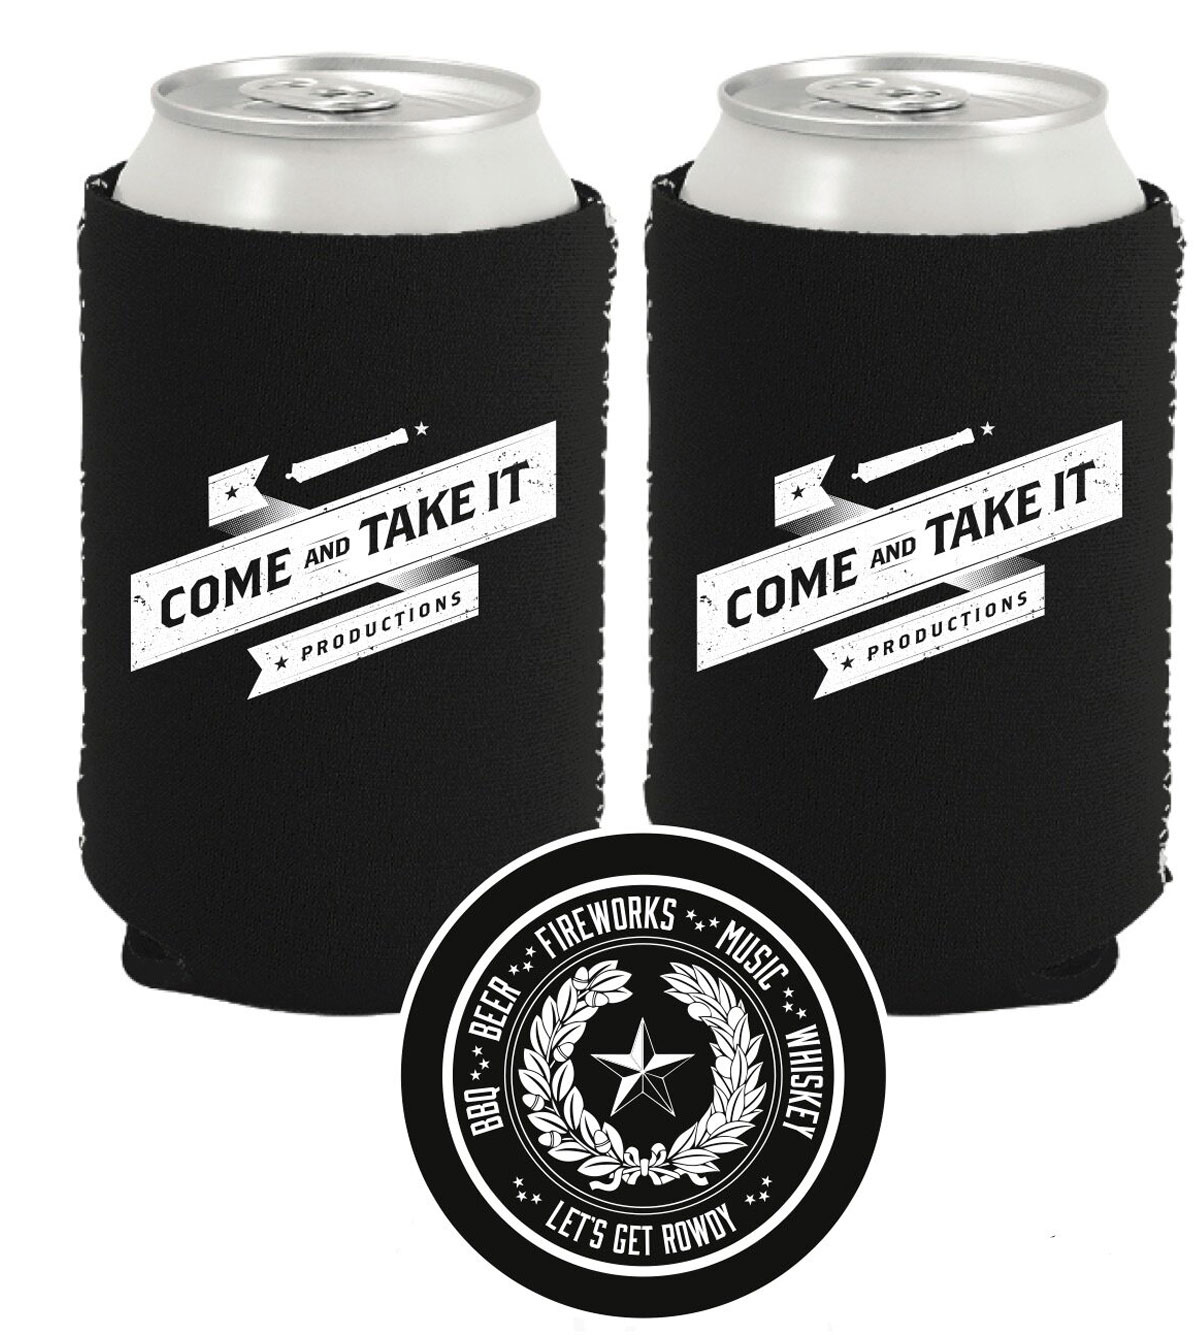 Come-and-Take-It-Productions-koozie-v2